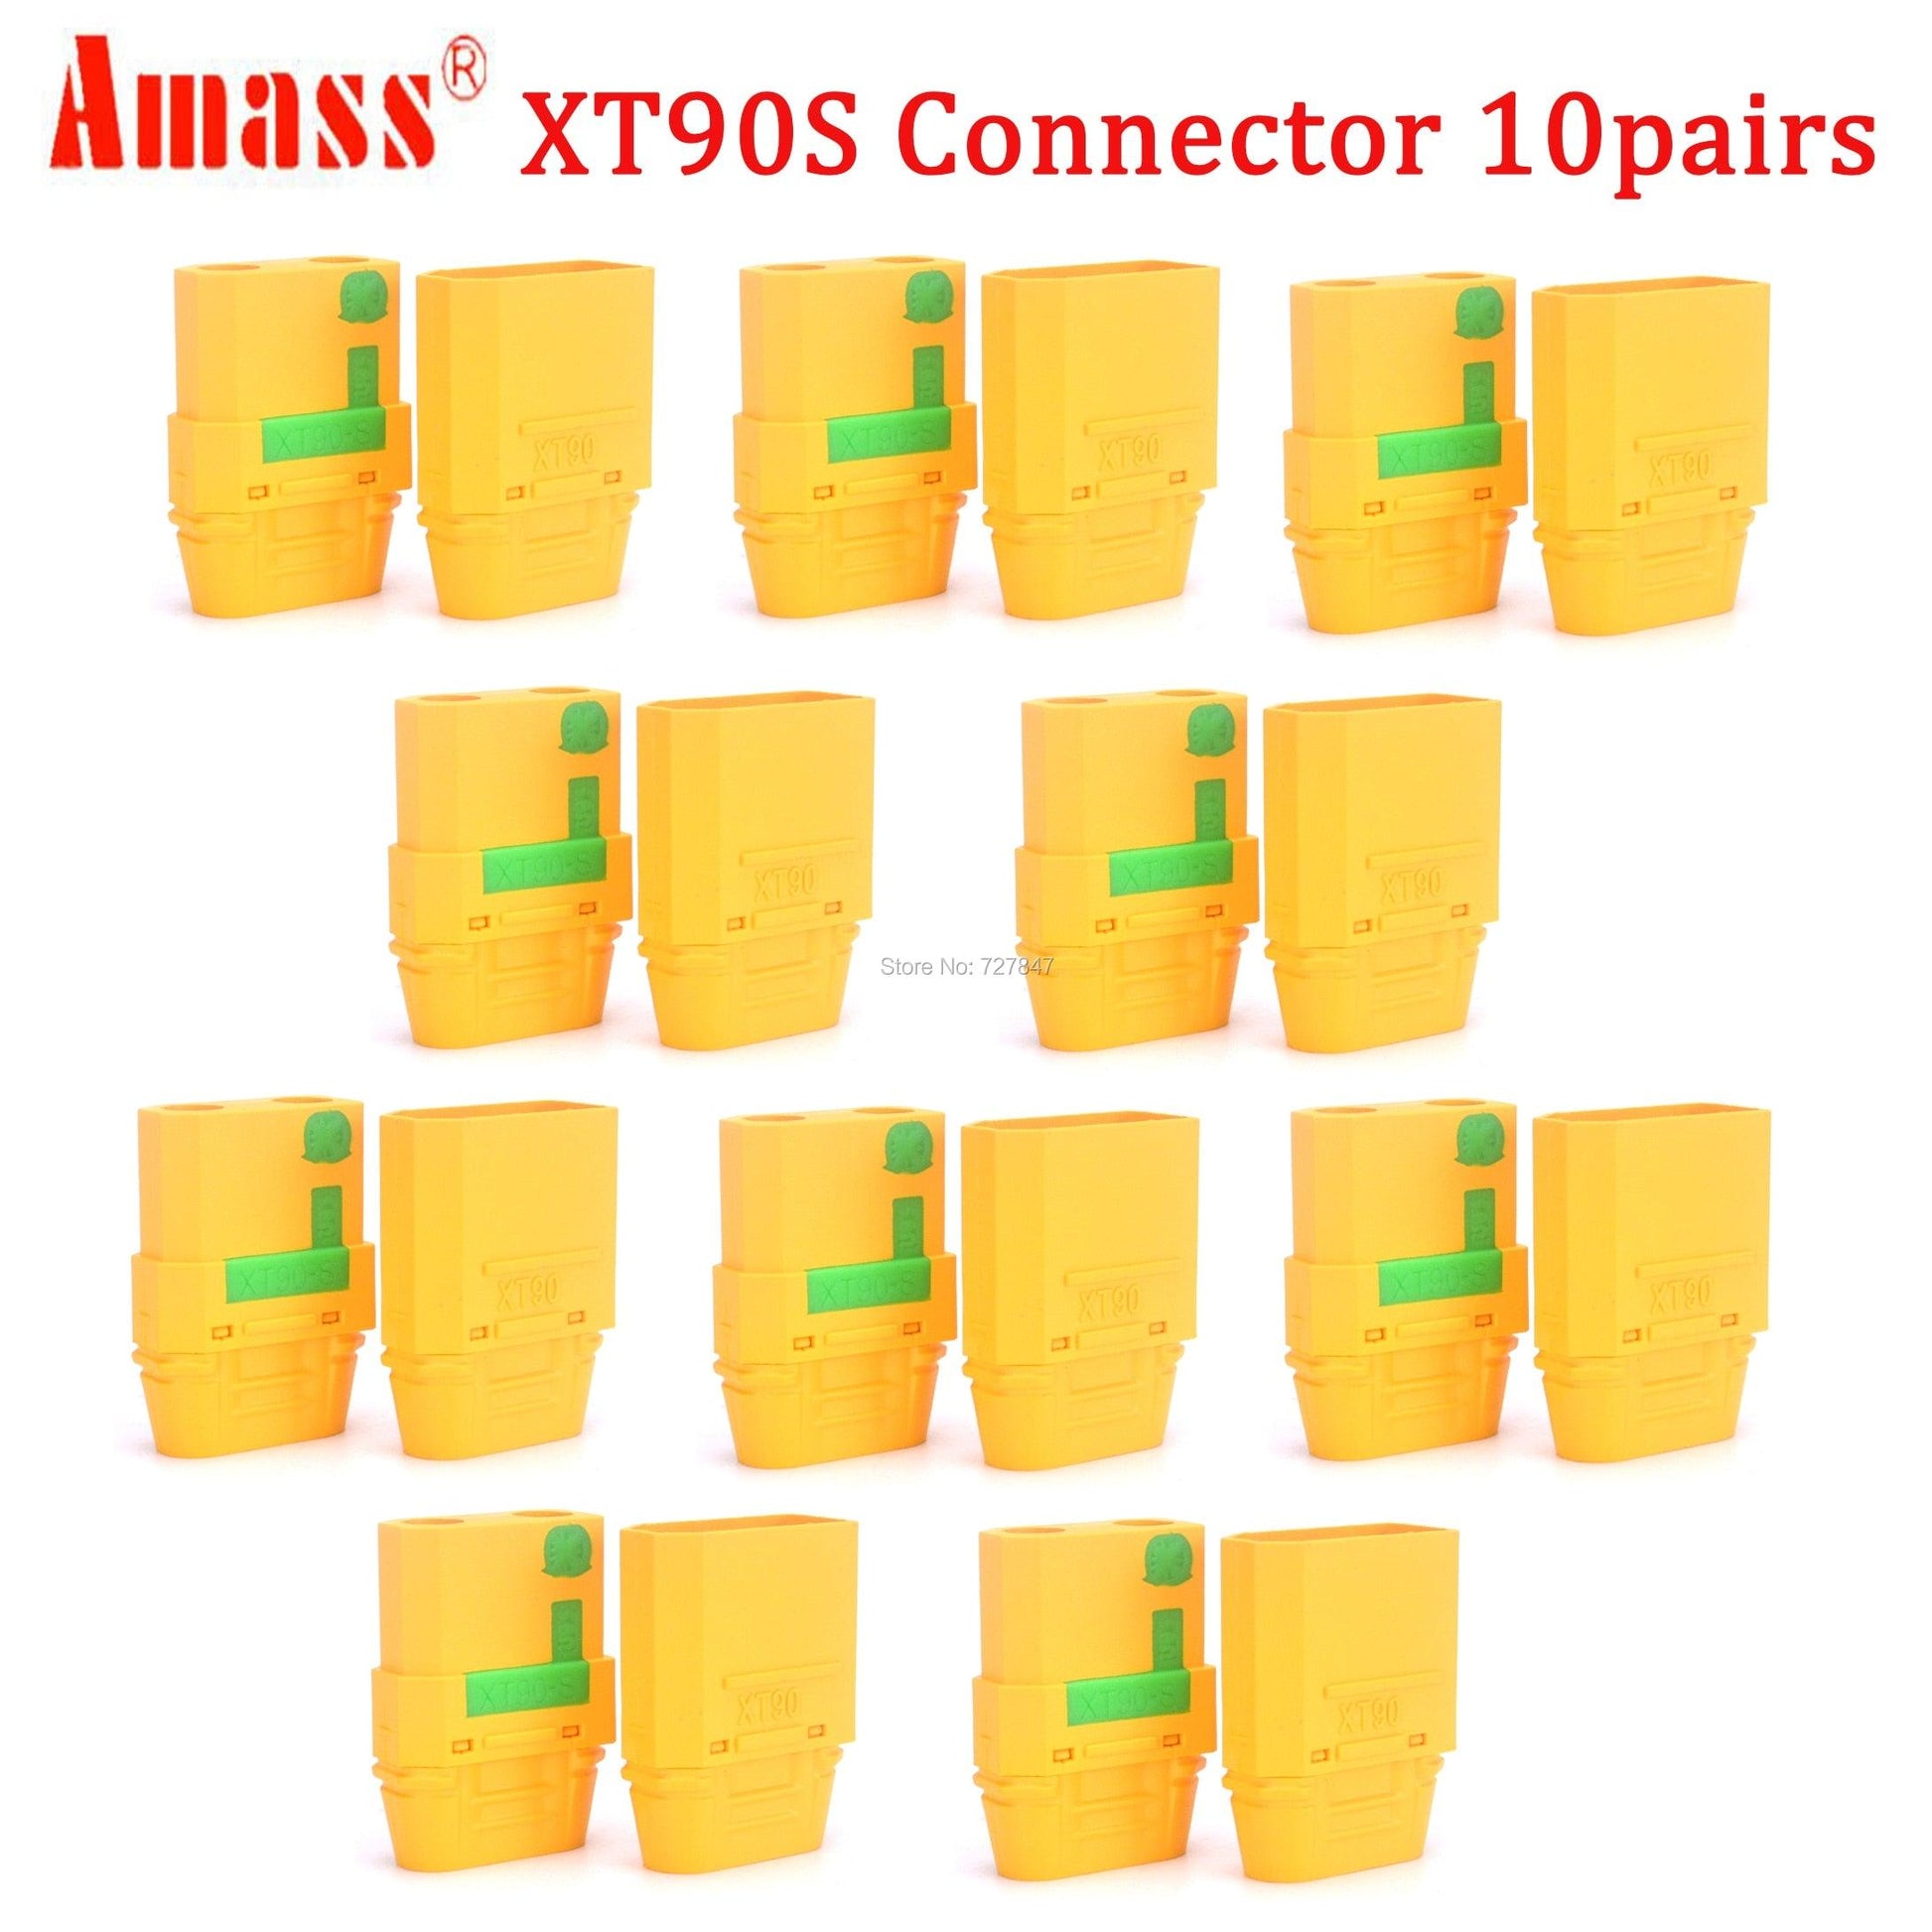 FPV Drone Connector Plug - 5 / 10 Pairs High Quality XT30 XT30U MR30 XT60 XT60H MR60 XT60PW XT90 XT90S Connector Plug for Battery Quadcopter Multicopter - RCDrone